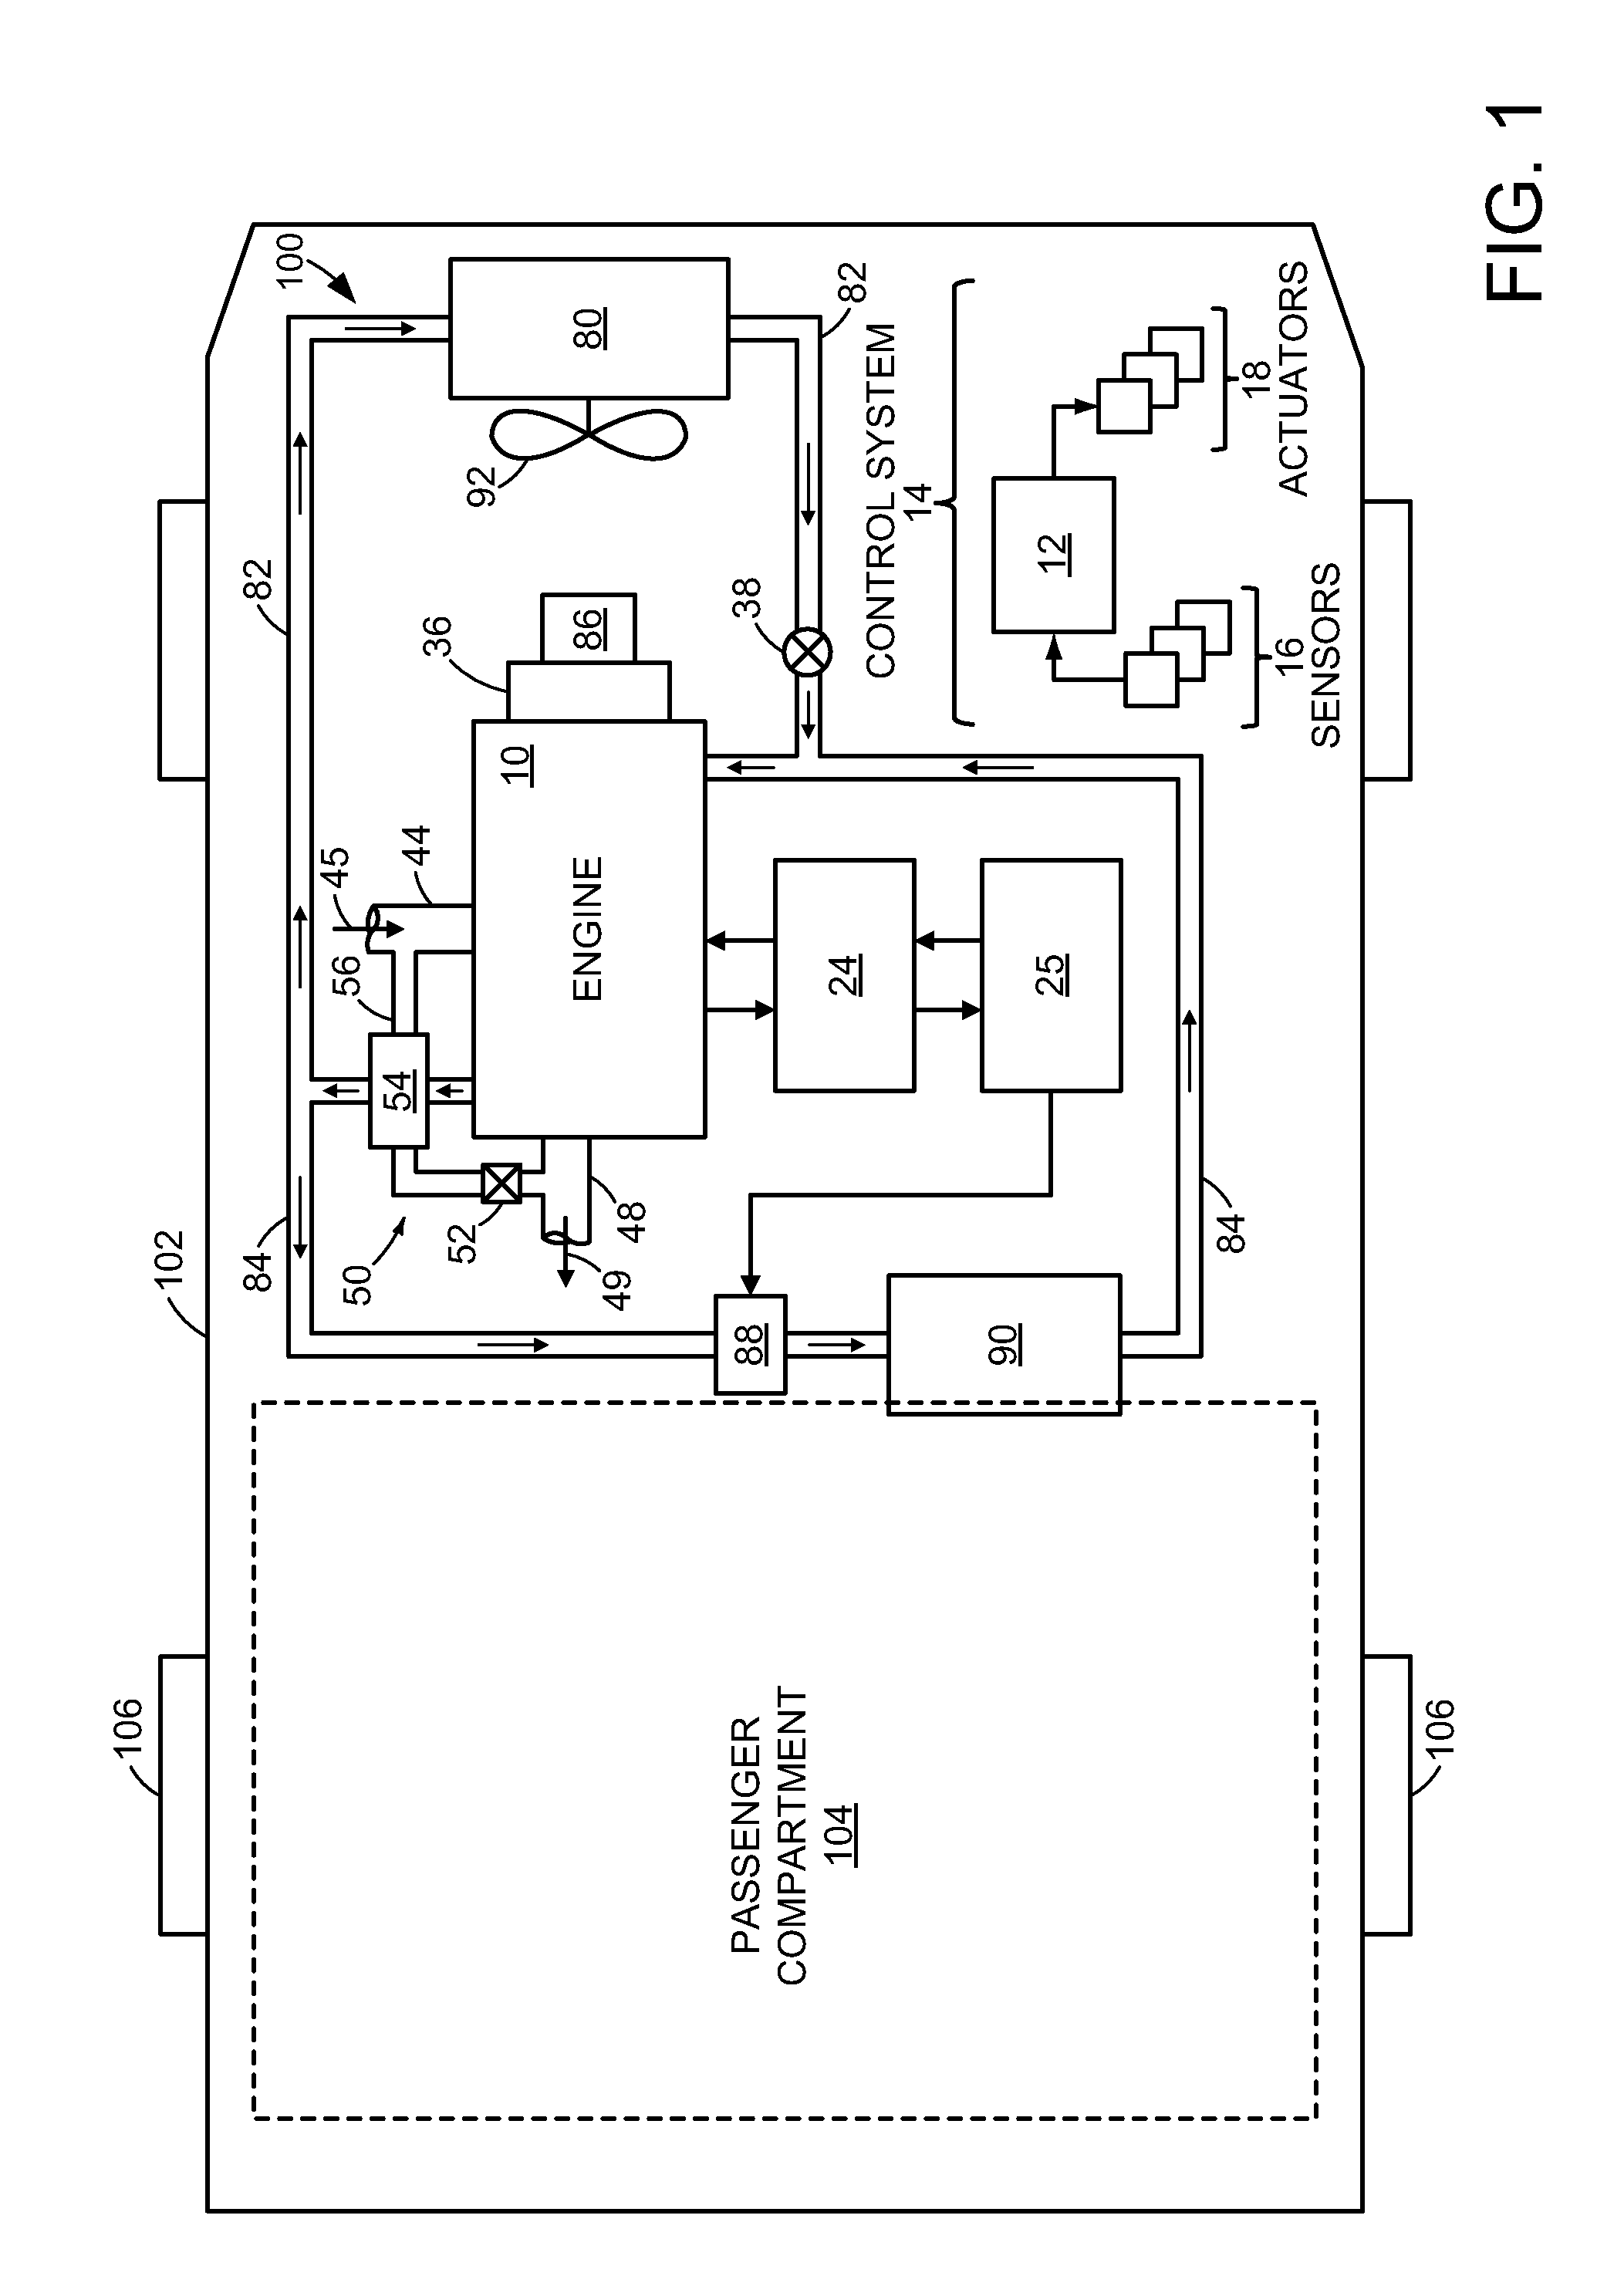 Auxiliary pump scheme for a cooling system in a hybrid-electric vehicle